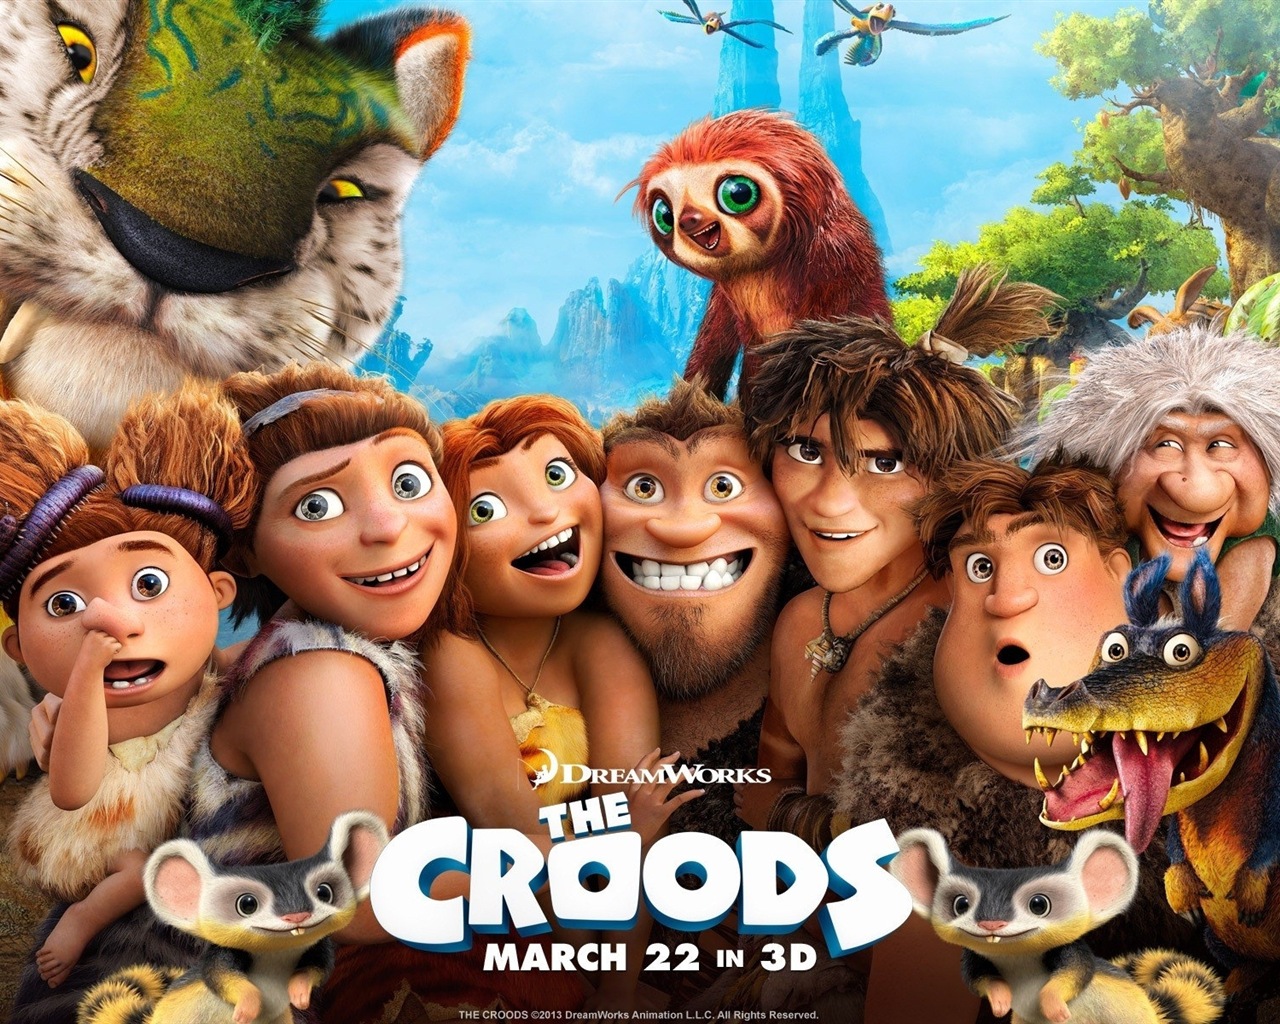 V Croods HD Movie Wallpapers #1 - 1280x1024